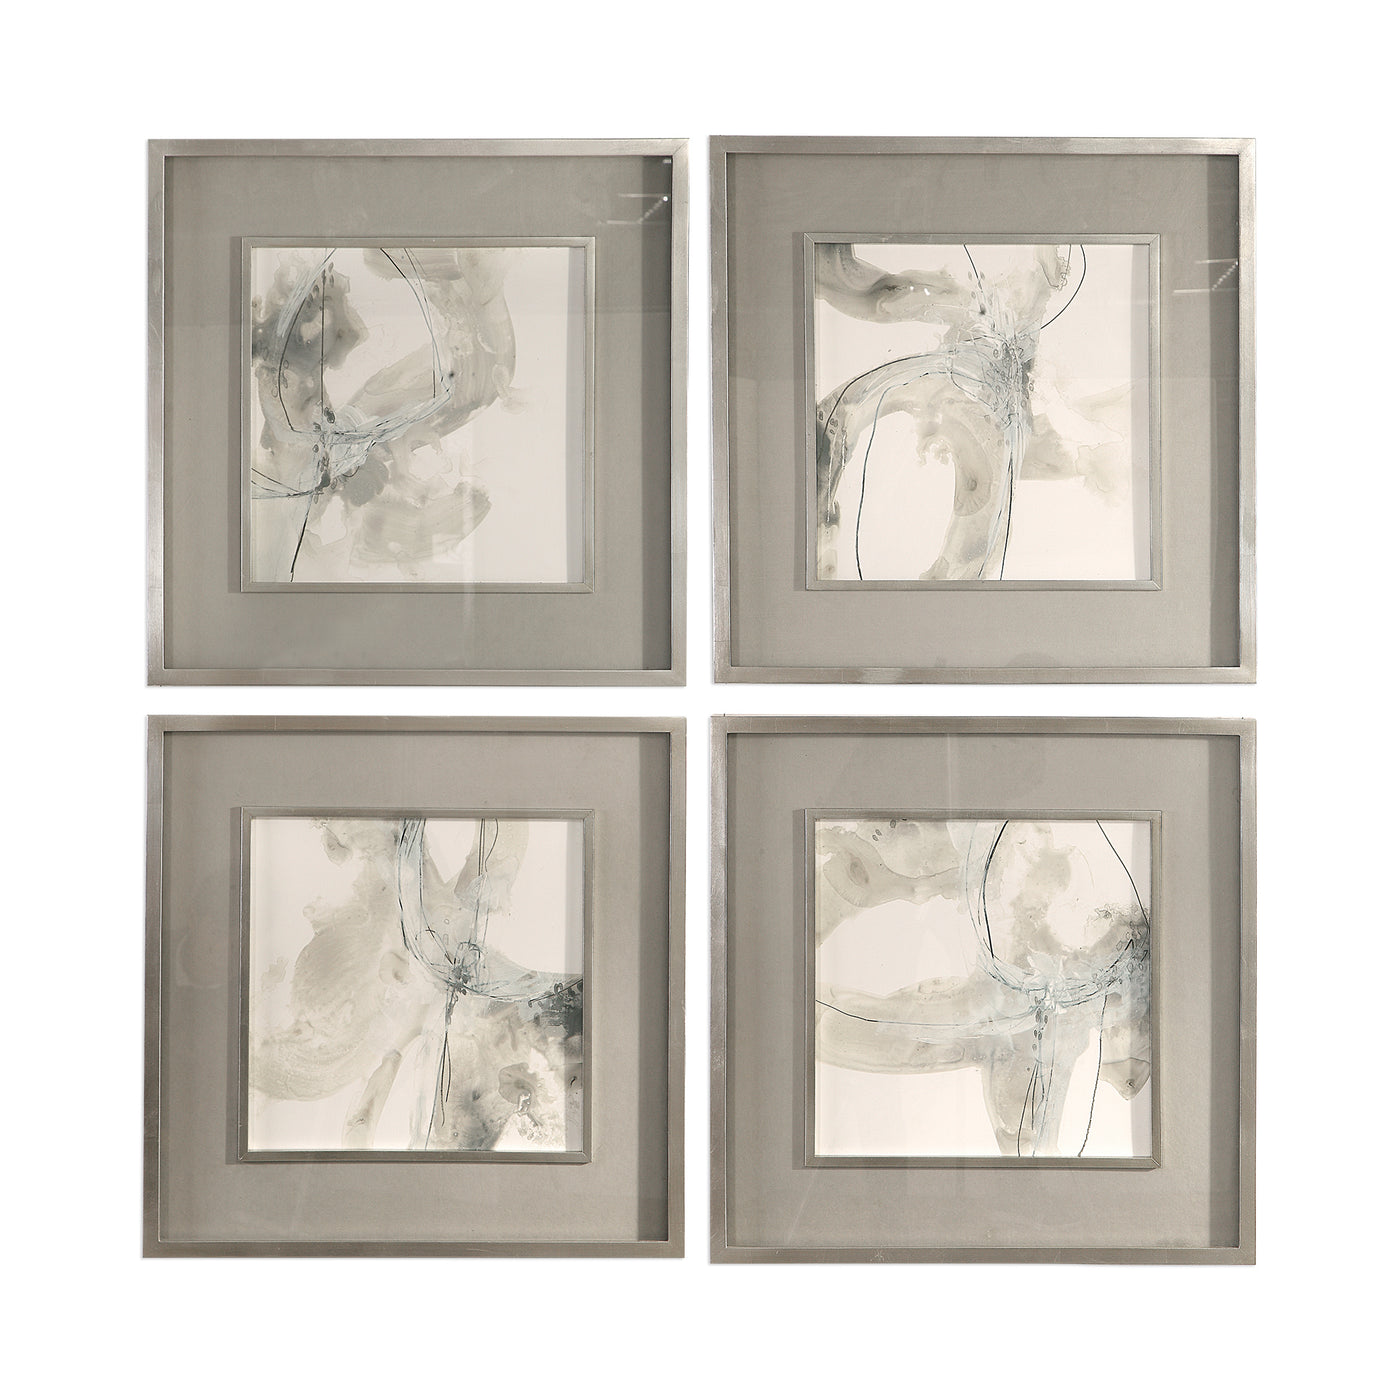 A Unique, Minimalist Design Is Featured In These Abstract Art Prints. Earthy Neutral Tones Of Warm Gray, Charcoal, And Off...